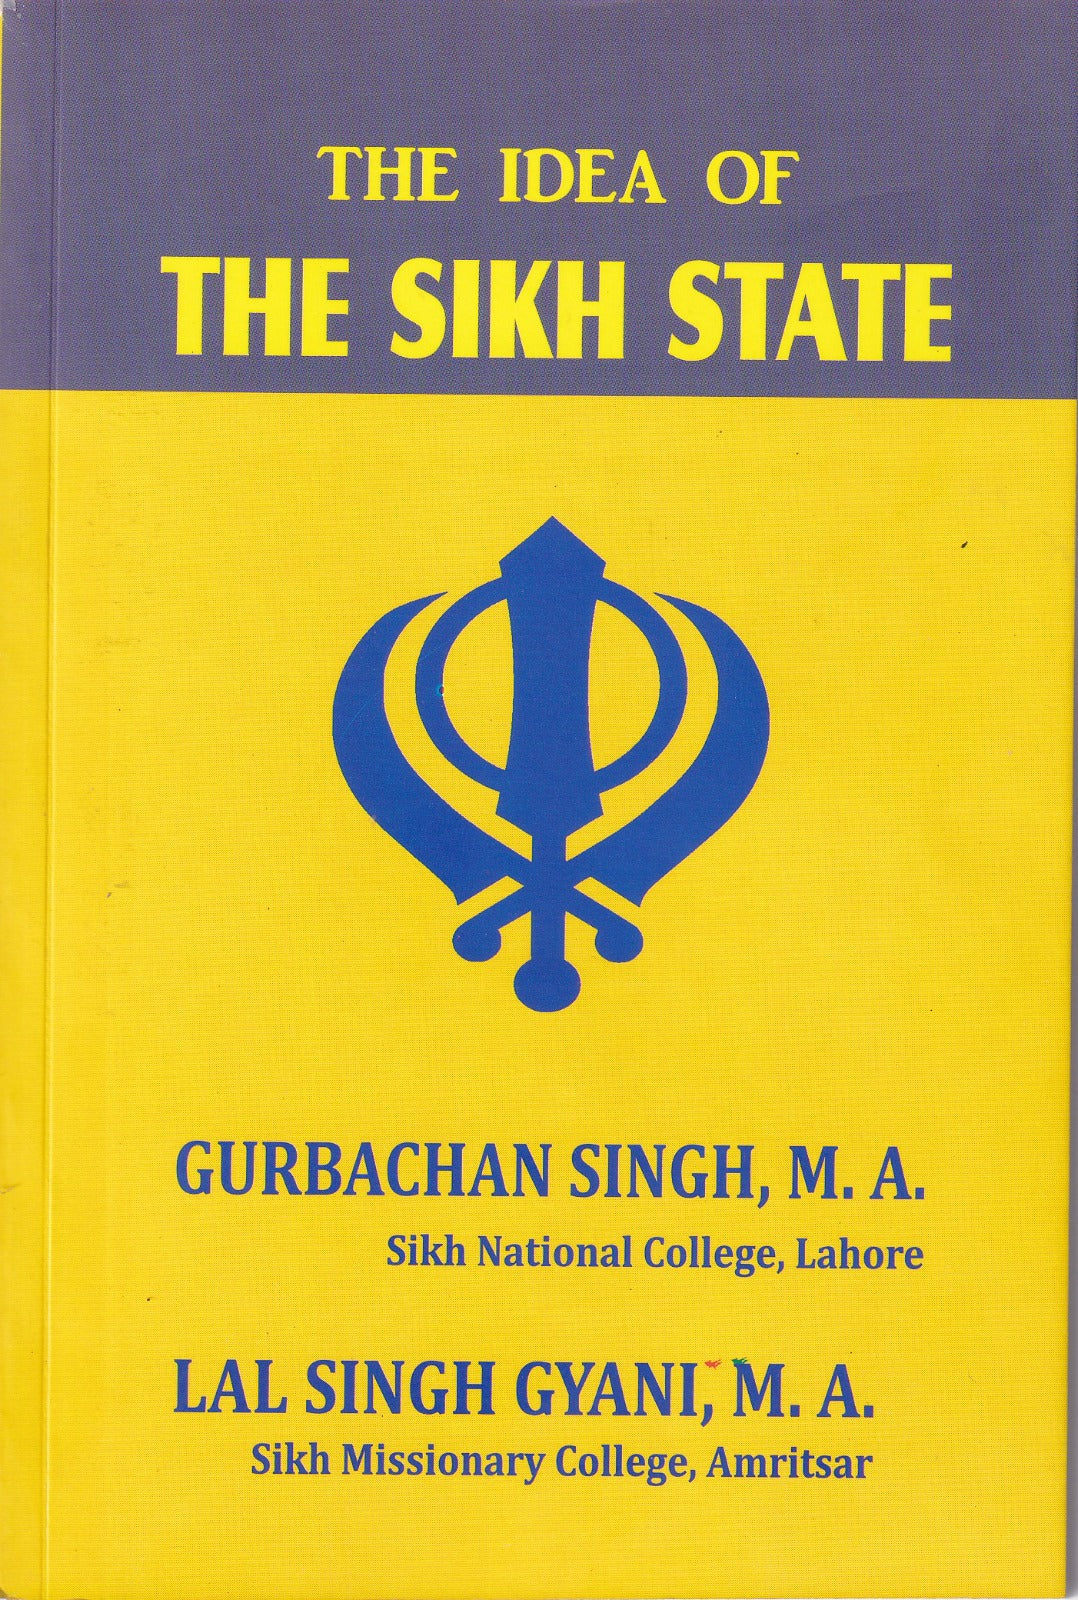 THE IDEA OF THE SIKH STATE